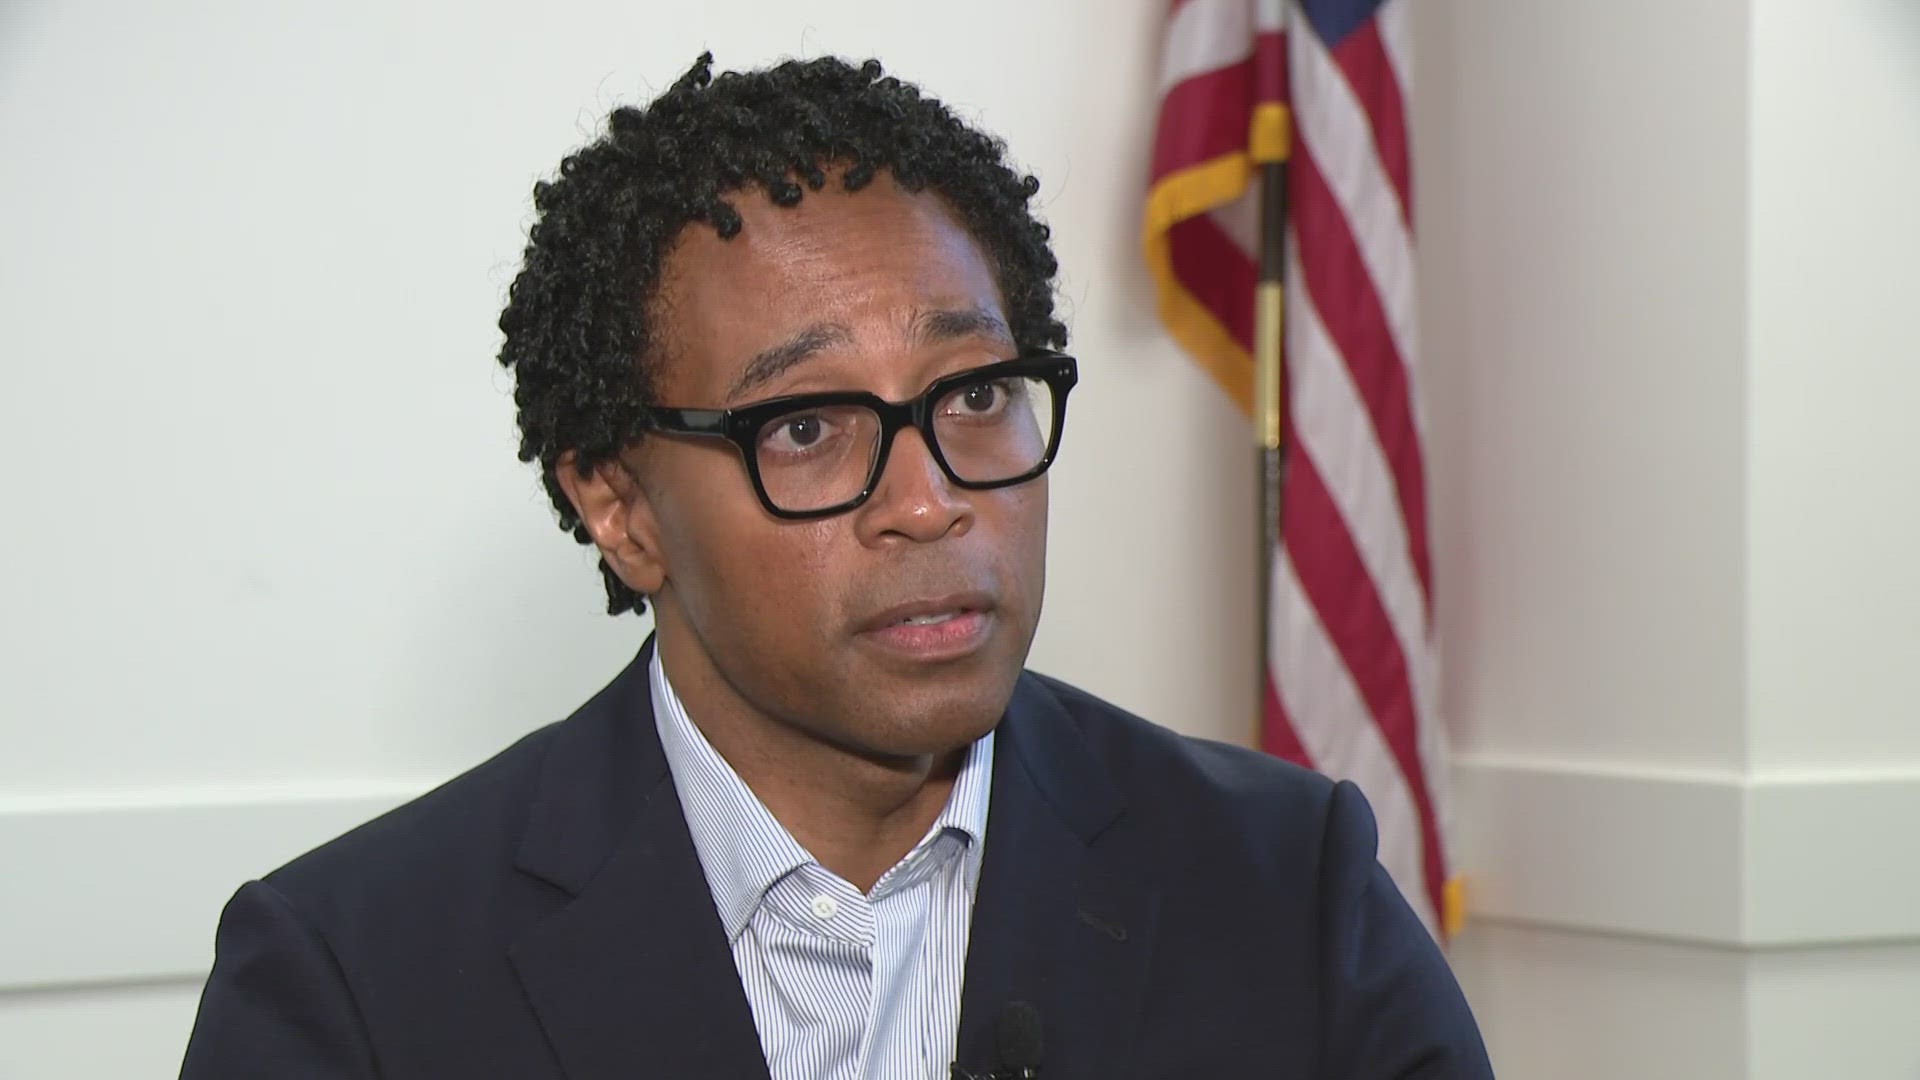 Before becoming the top prosecutor in Missouri's largest county, Wesley Bell worked as a judge, law professor, public defender and Ferguson City Council member.